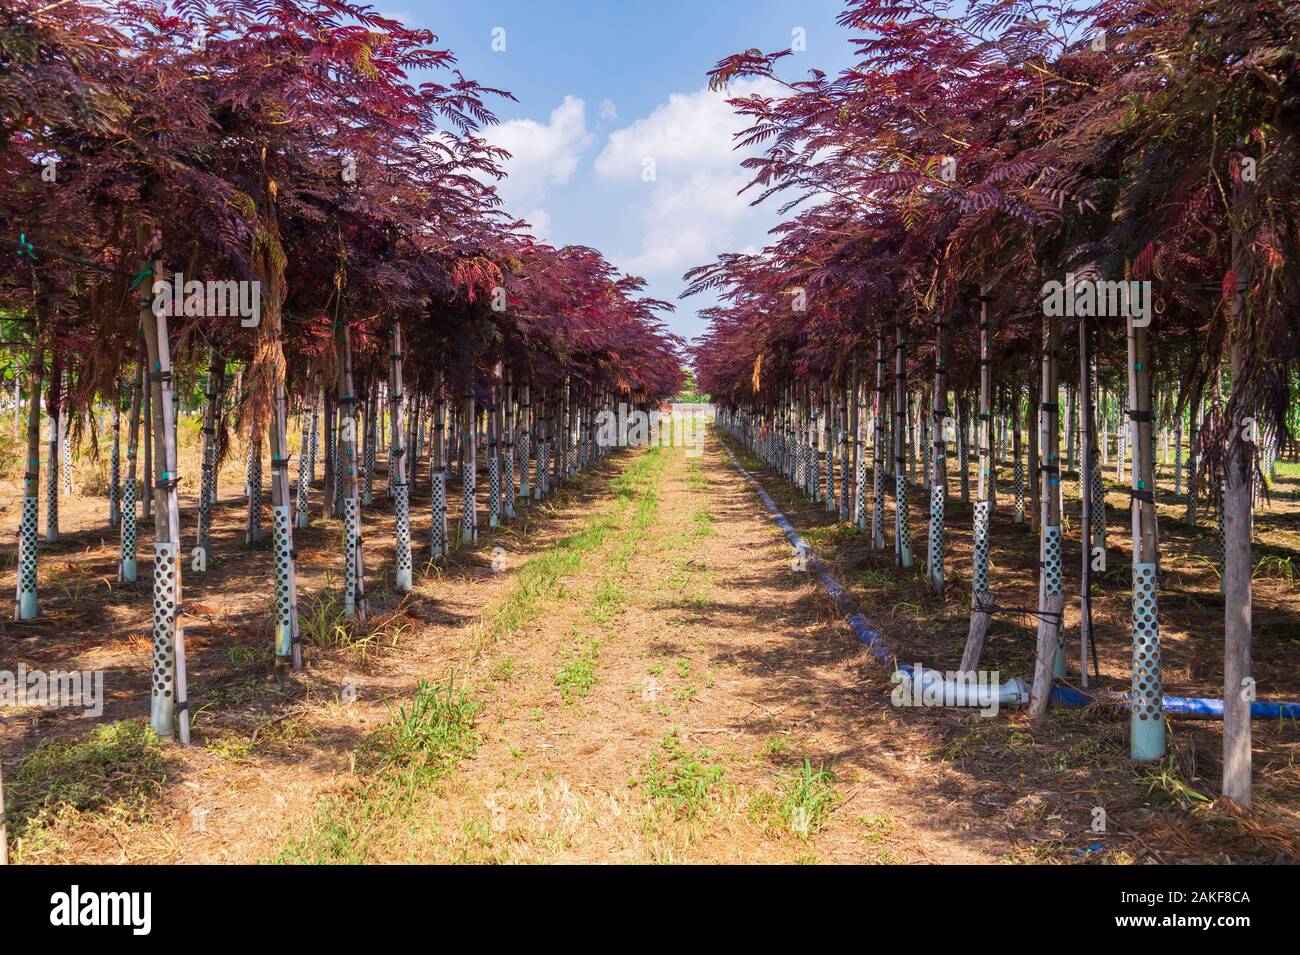 Rows of seedlings of albizia with red leaves in a nursery. Decorative tree in landscaping Stock Photo